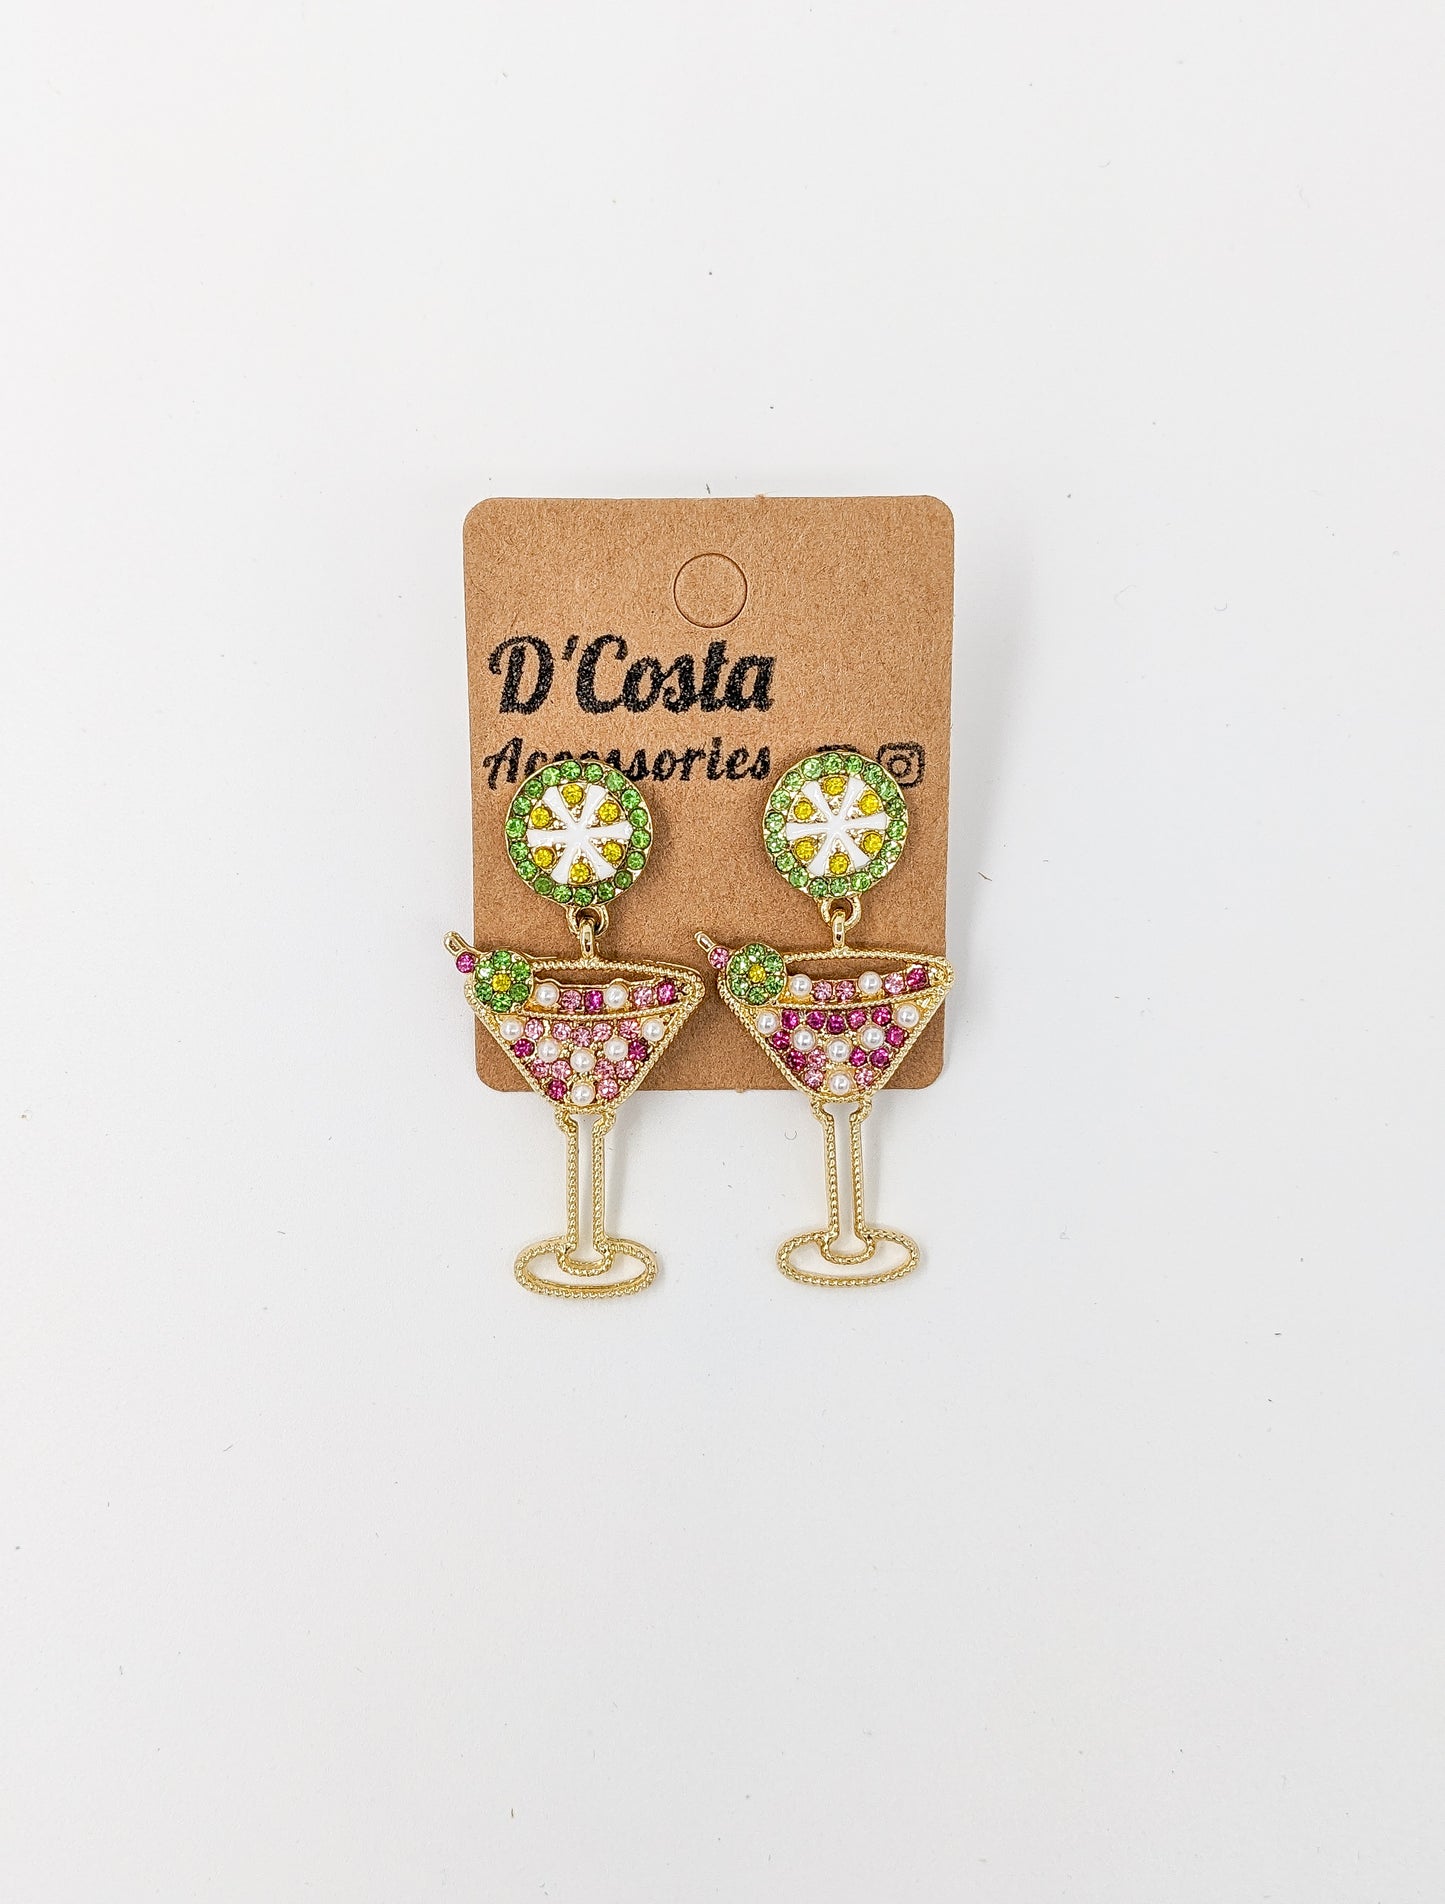 Cosmo Cocktail Earrings